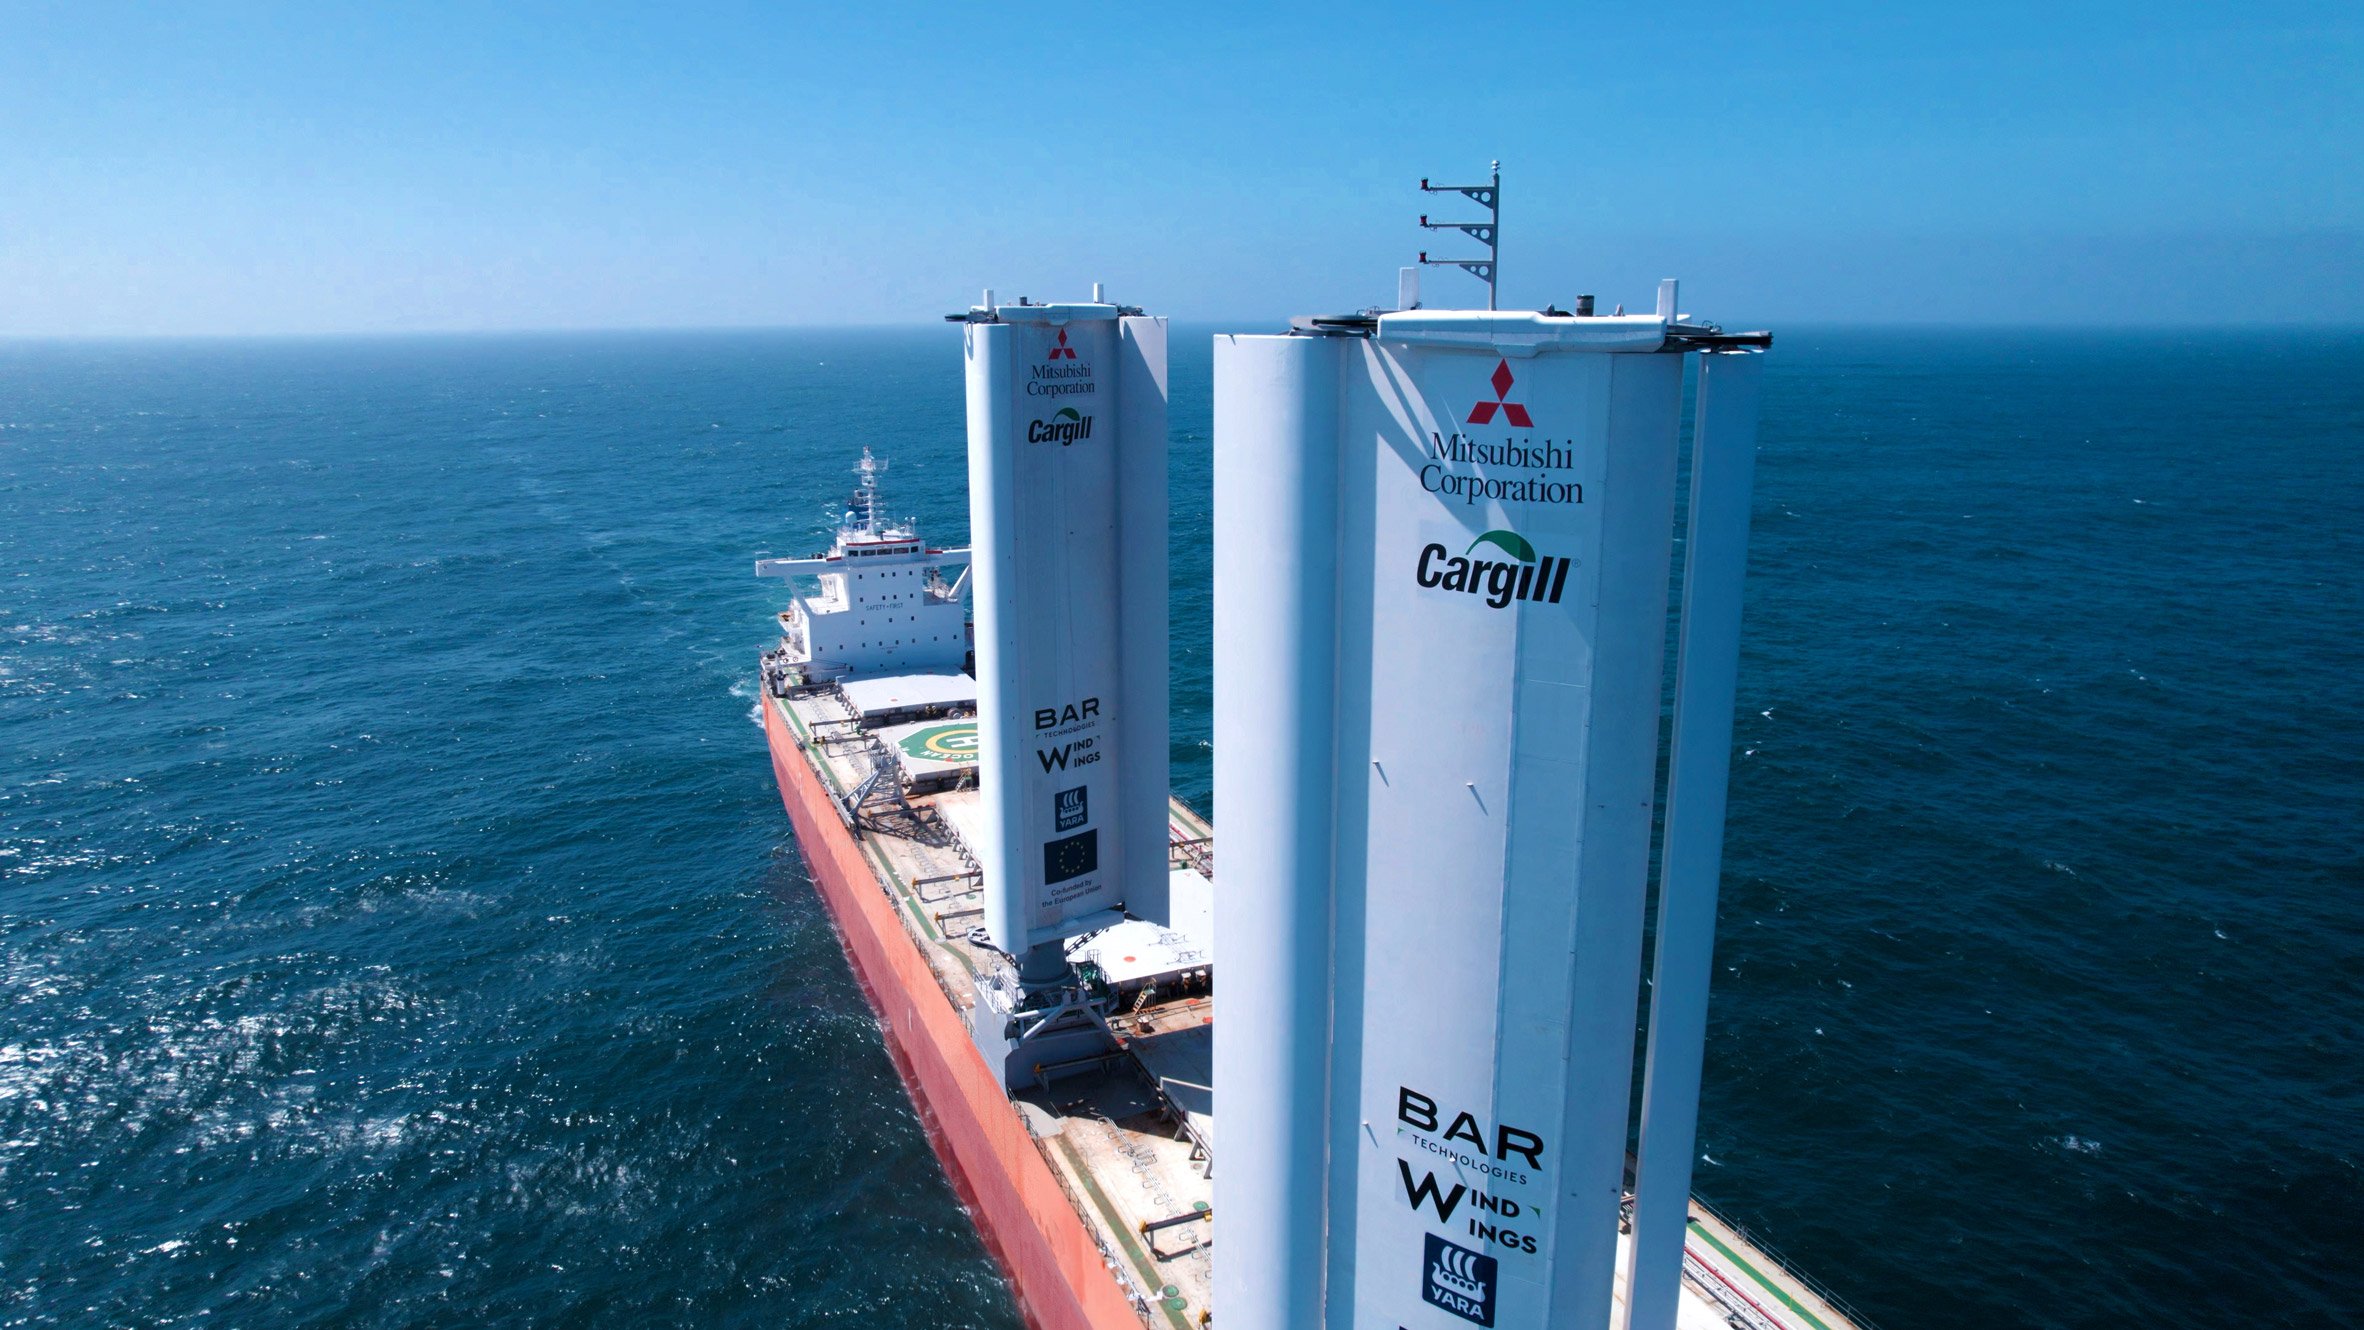 Wind-powered cargo ship Pyxis Ocean charts course for greener shipping